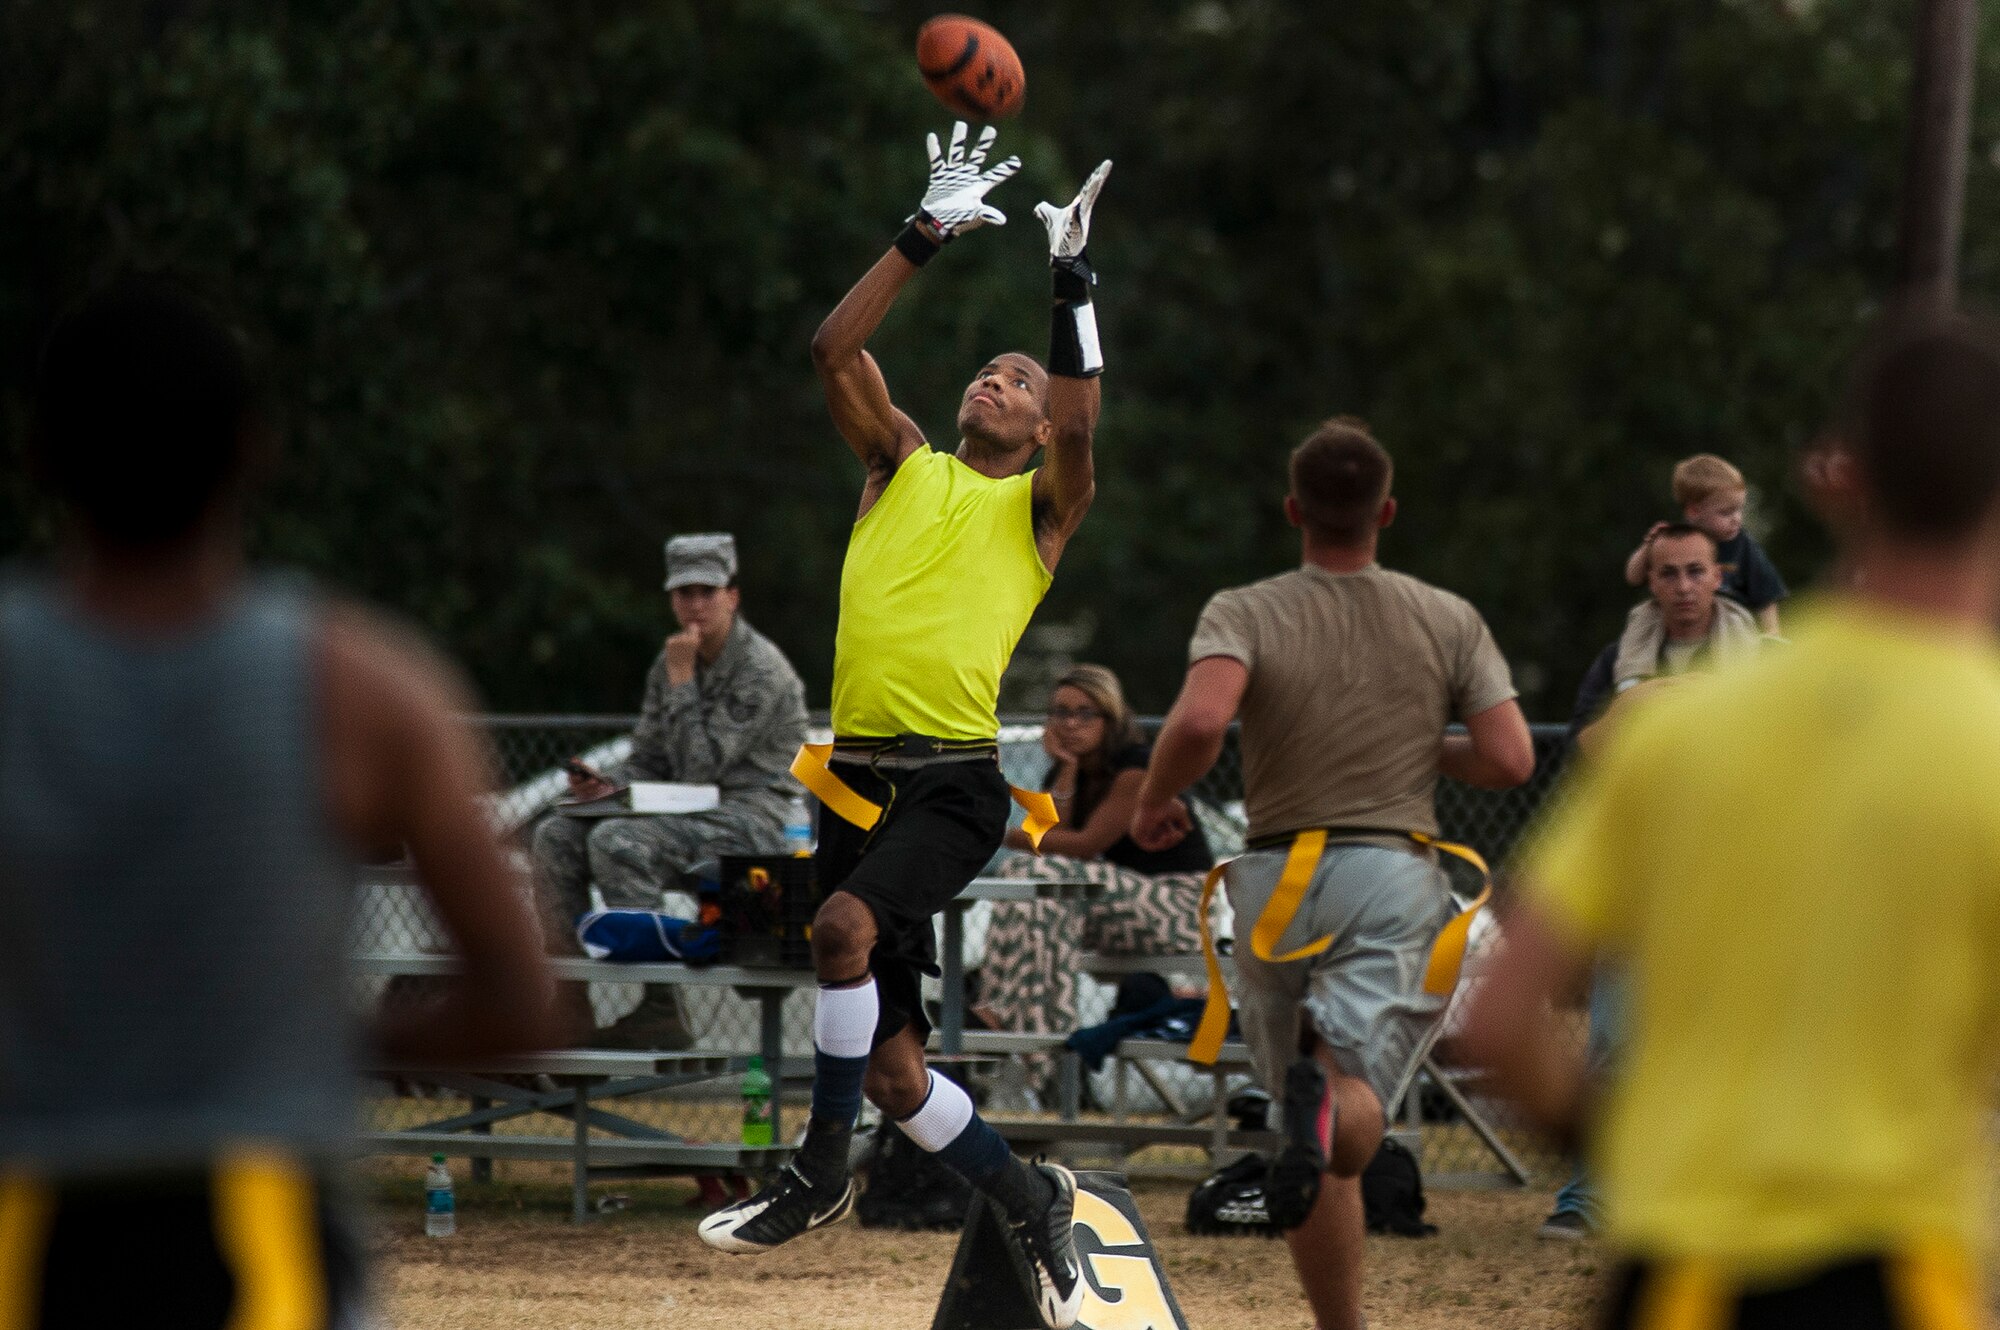 Jay Gould, a receiver for the 314th Aircraft Maintenance Squadron intramural flag football team, looks in a reception during the intramural flag football championship game Sept. 18, 2013, at Little Rock Air Force Base, Ark. Gould scored a touchdown on the play, en route to a 41-21 win. (U.S. Air Force photo by Staff Sgt. Russ Scalf)